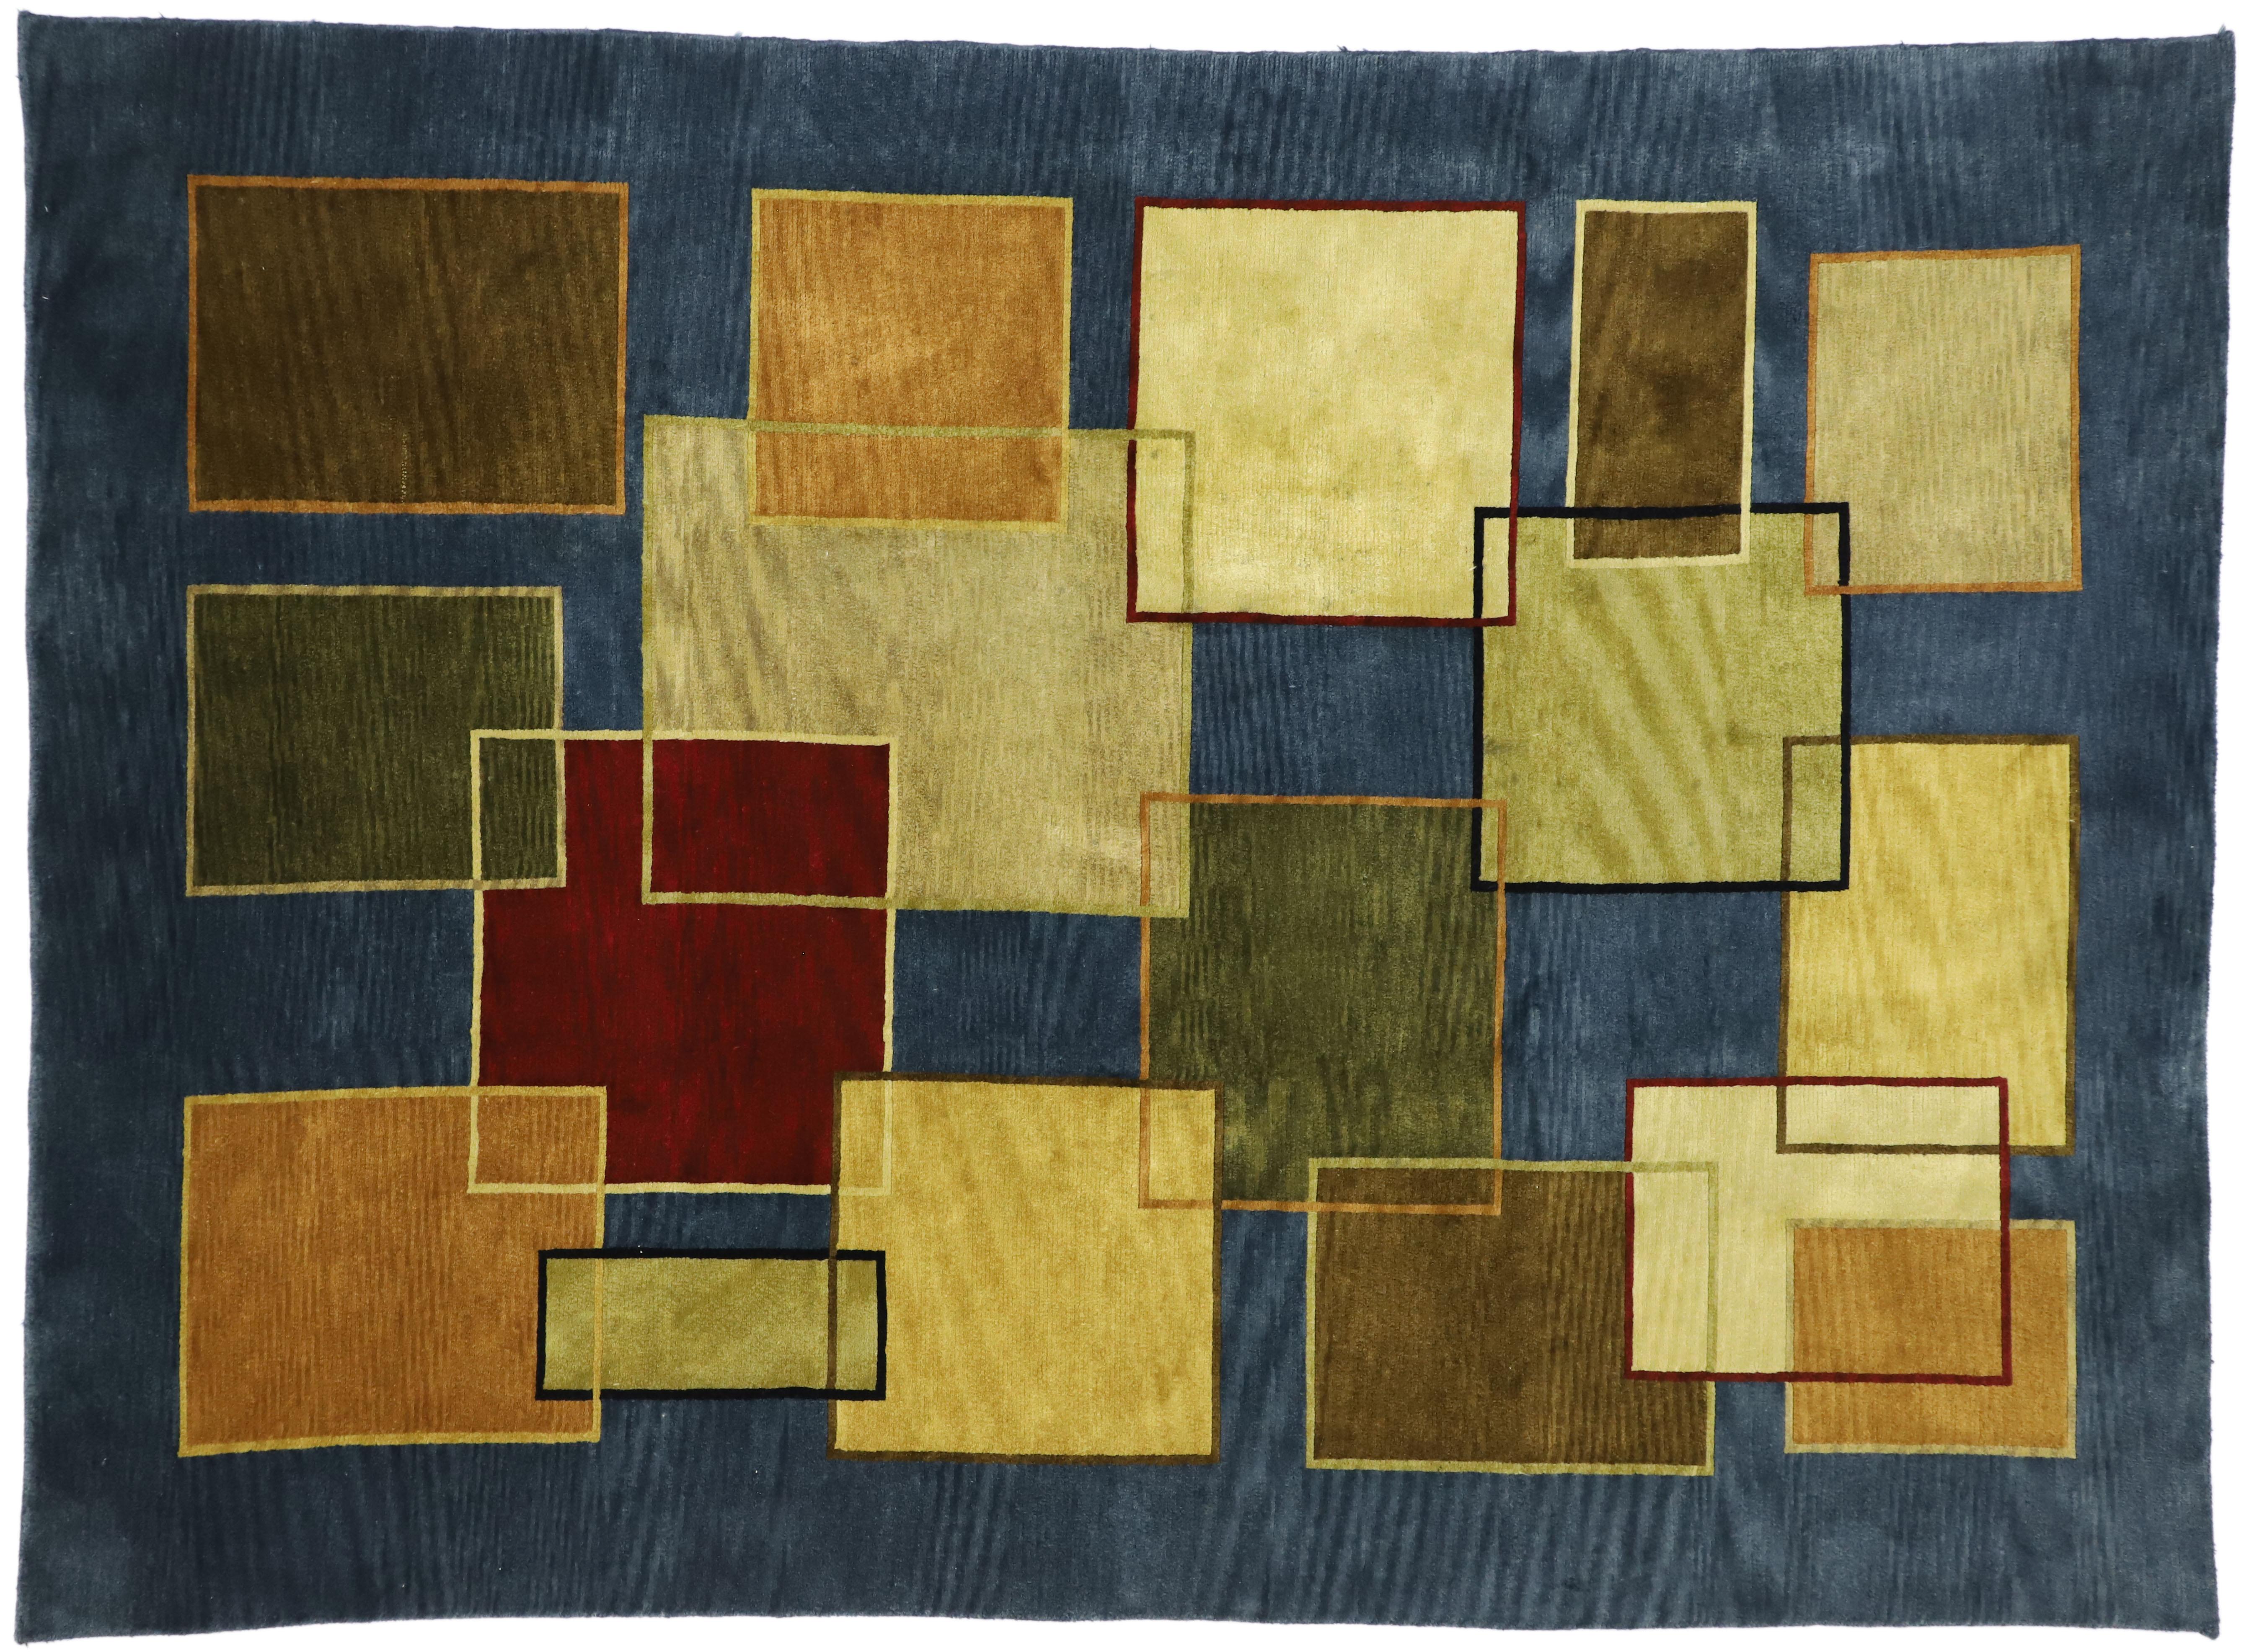 Wool Vintage Mid-Century Modern Style Rug with Cubism and Bauhaus Design